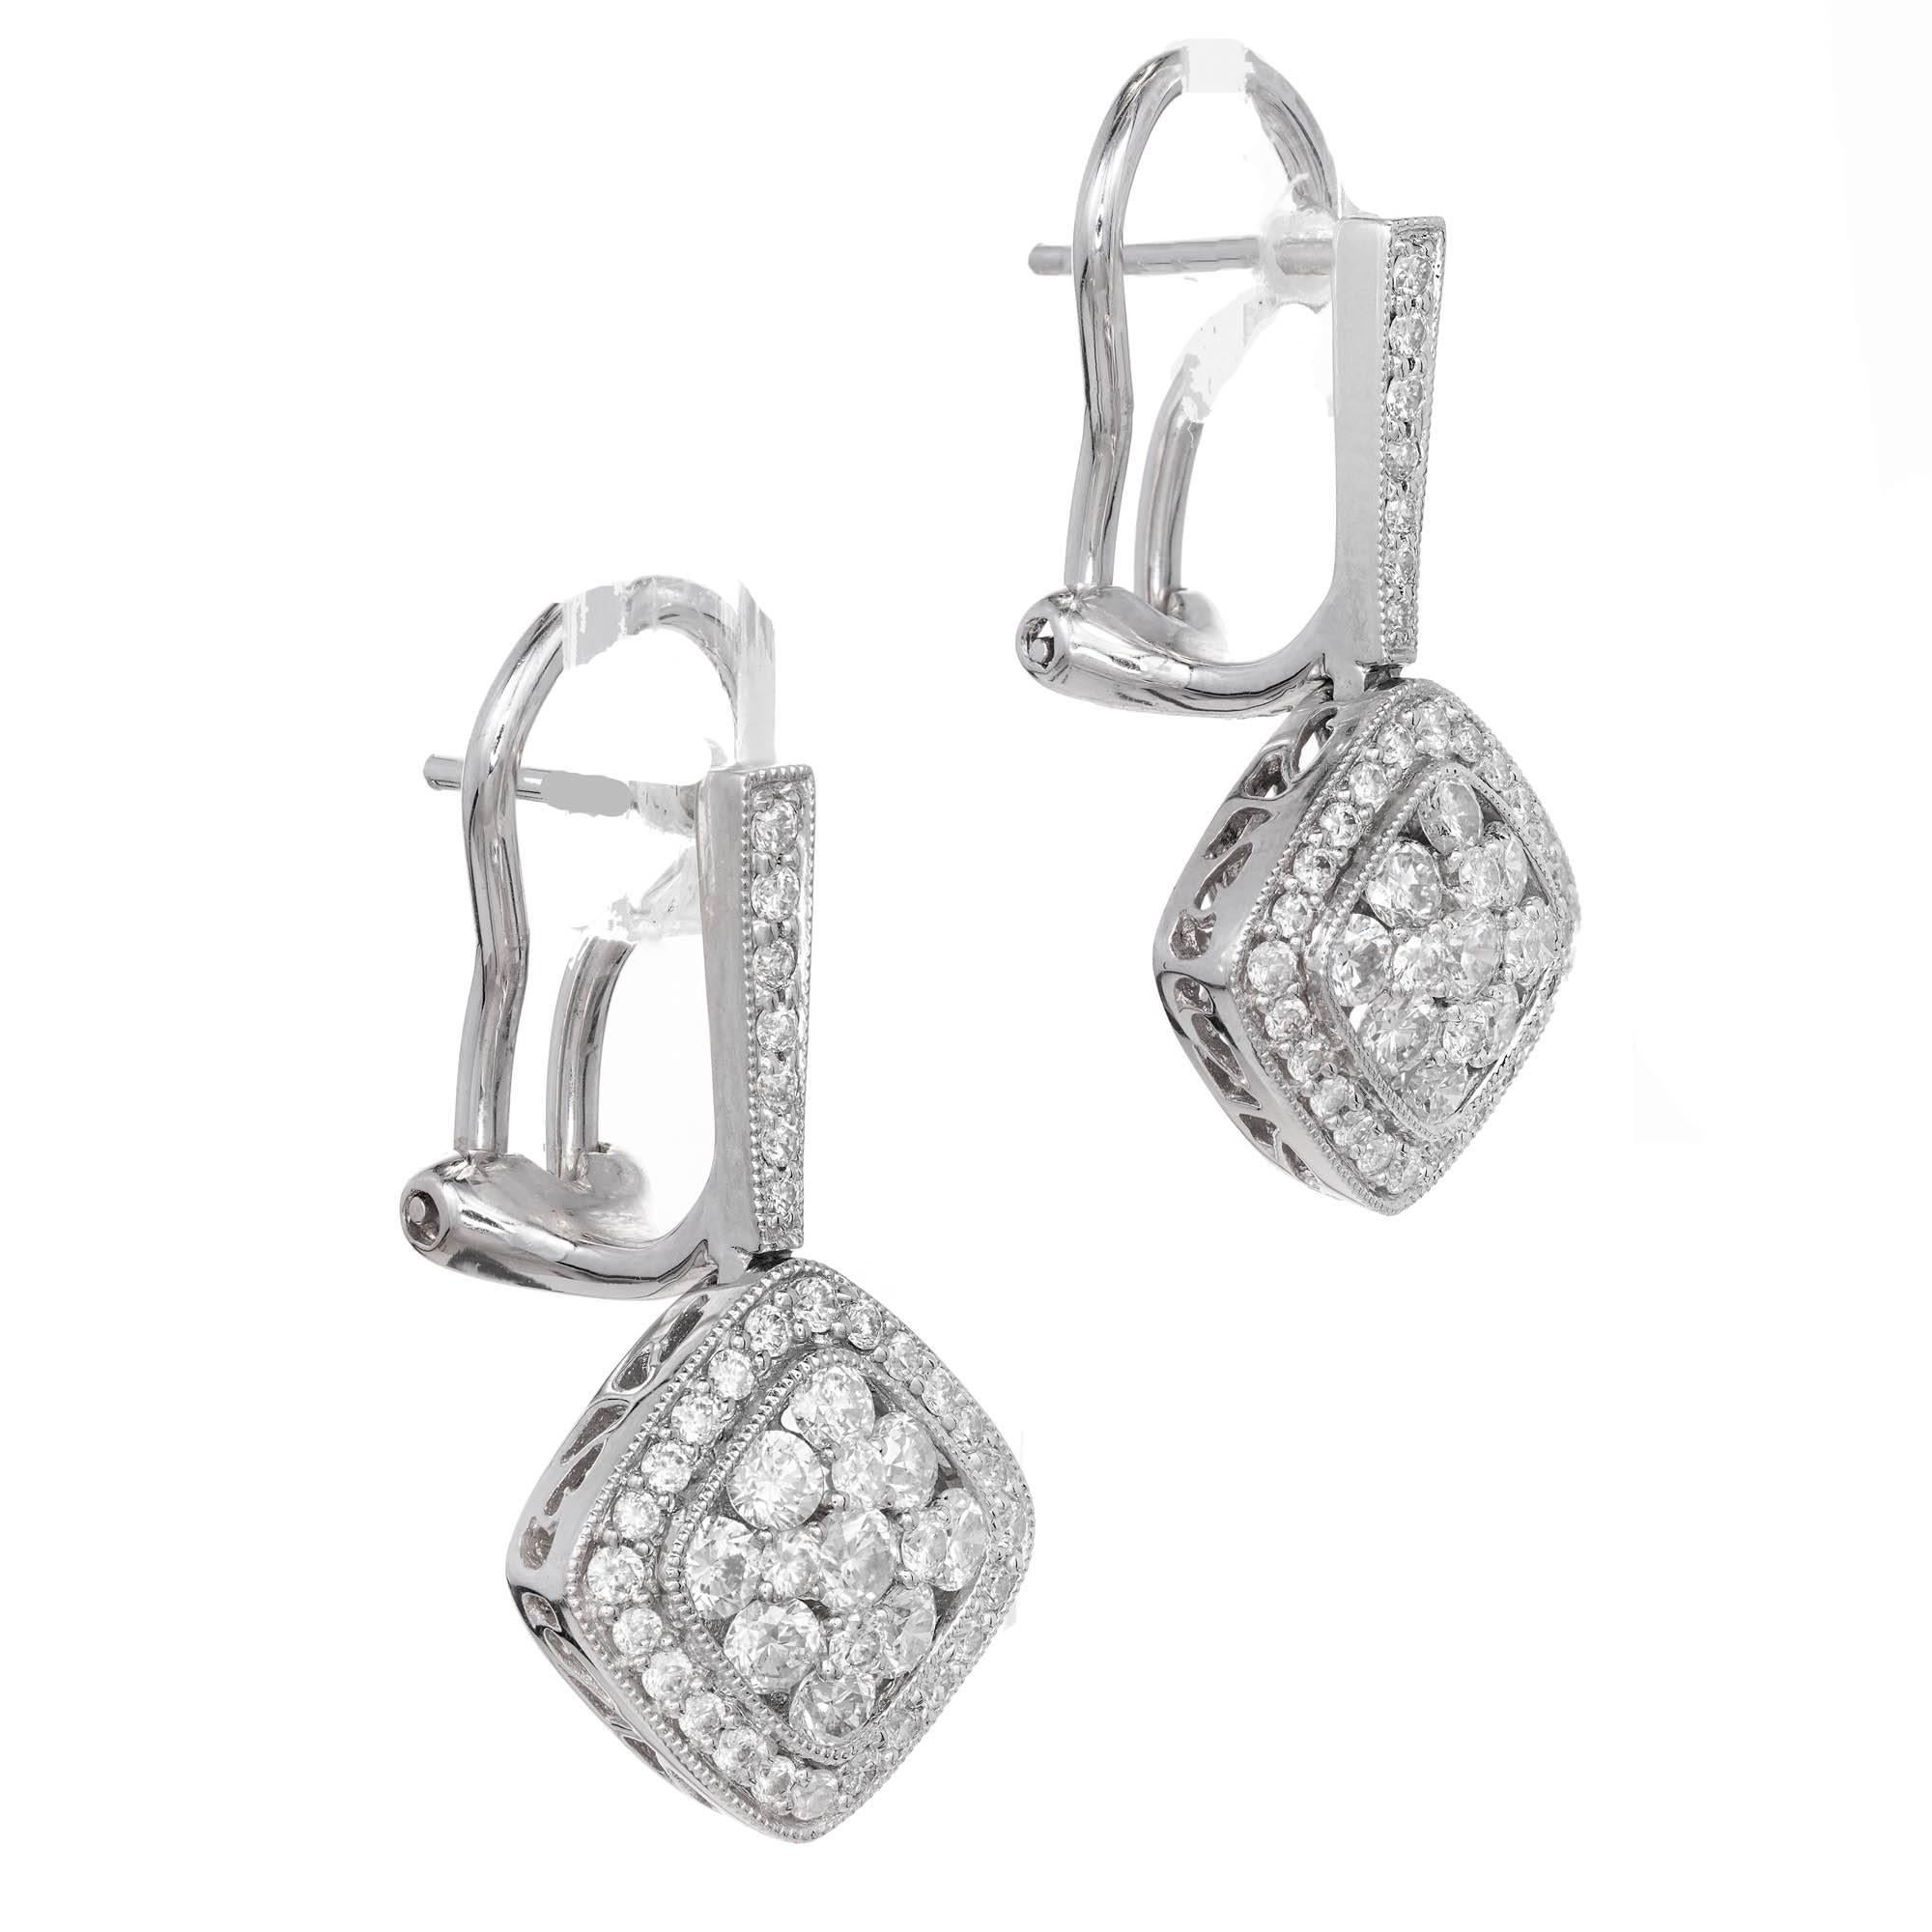 Gregg Ruth Diamond cluster dangle earrings in 18k white gold with bright white full cut Diamonds.

88 round full cut Diamonds, approx. total weight 1.20cts, F – G, VS2 – SI1 
18k white gold 
Tested: 18k 
Stamped: K18 
Hallmark: Gregg Ruth D1.20 
6.9